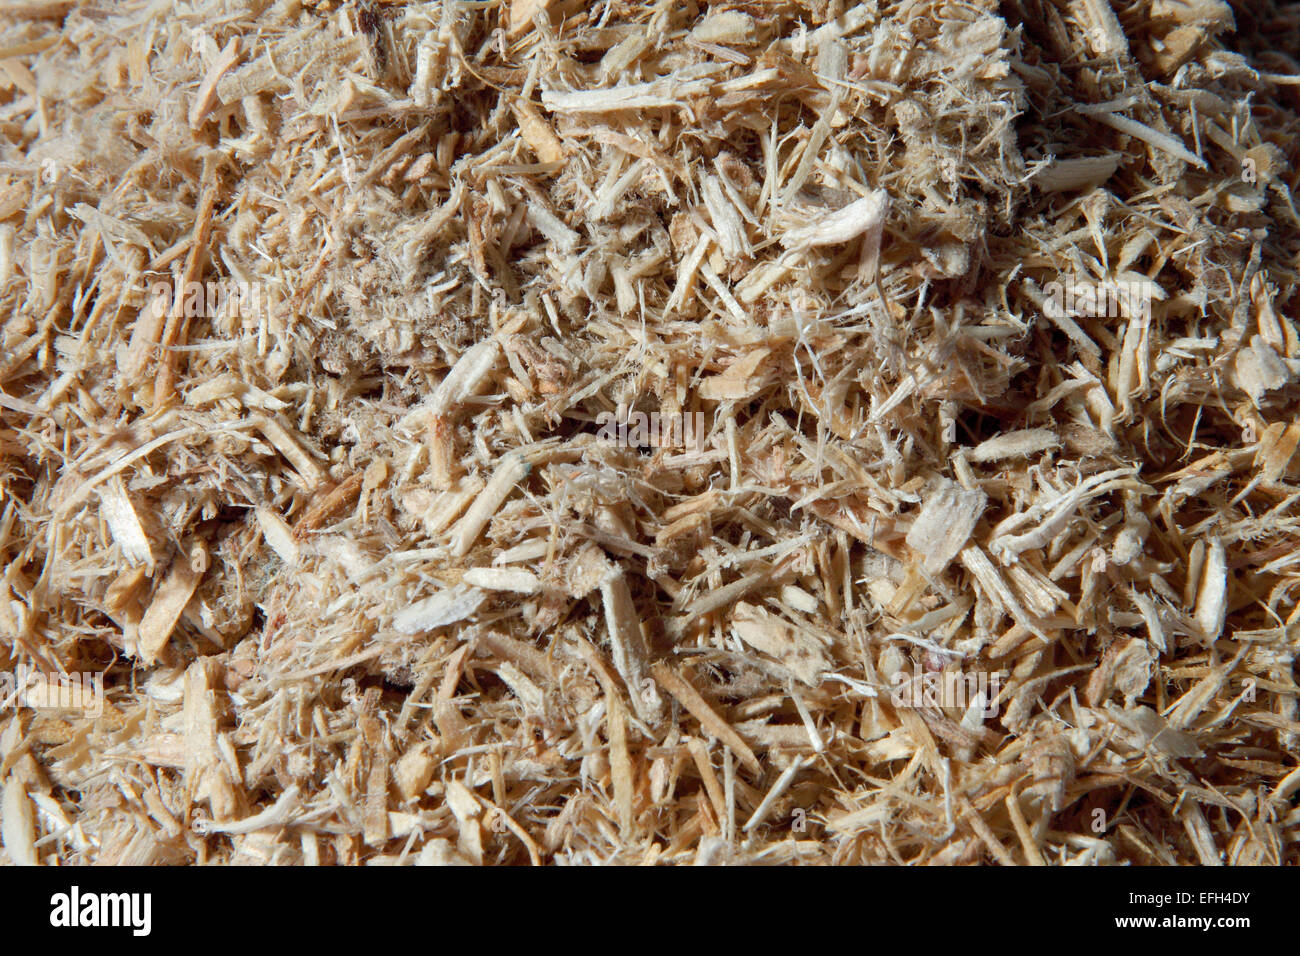 Forestry waste wood shavings for biomass Stock Photo